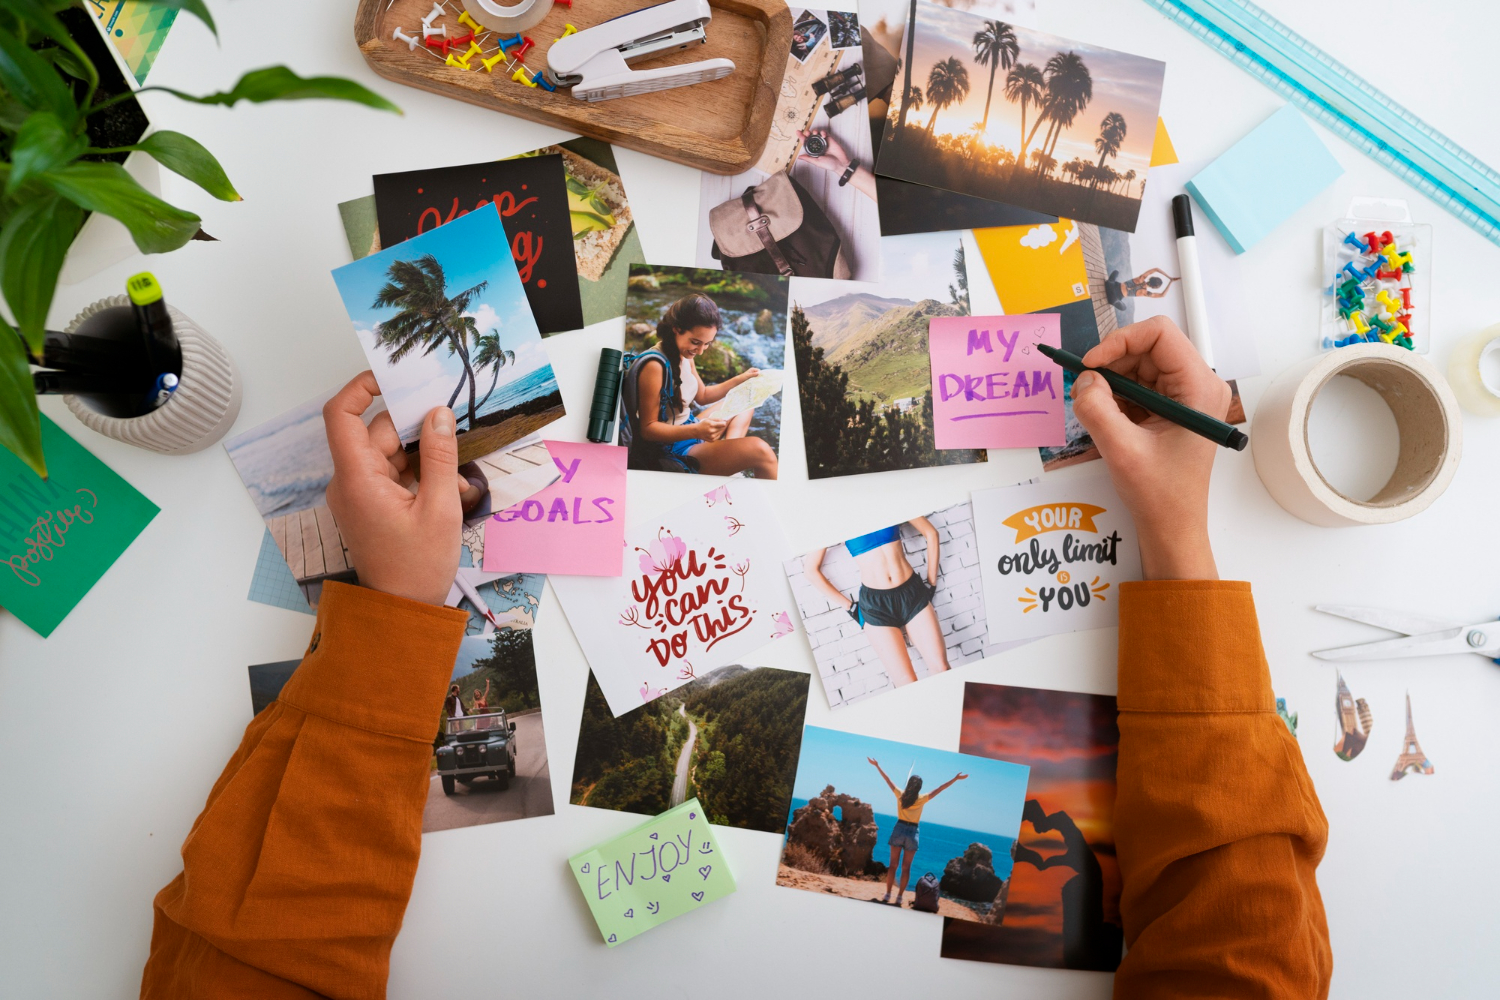  Celebrate love with personalized photo puzzles! A woman's hands hold a stack of photos on a table, ready to be turned into a unique marriage anniversary gift